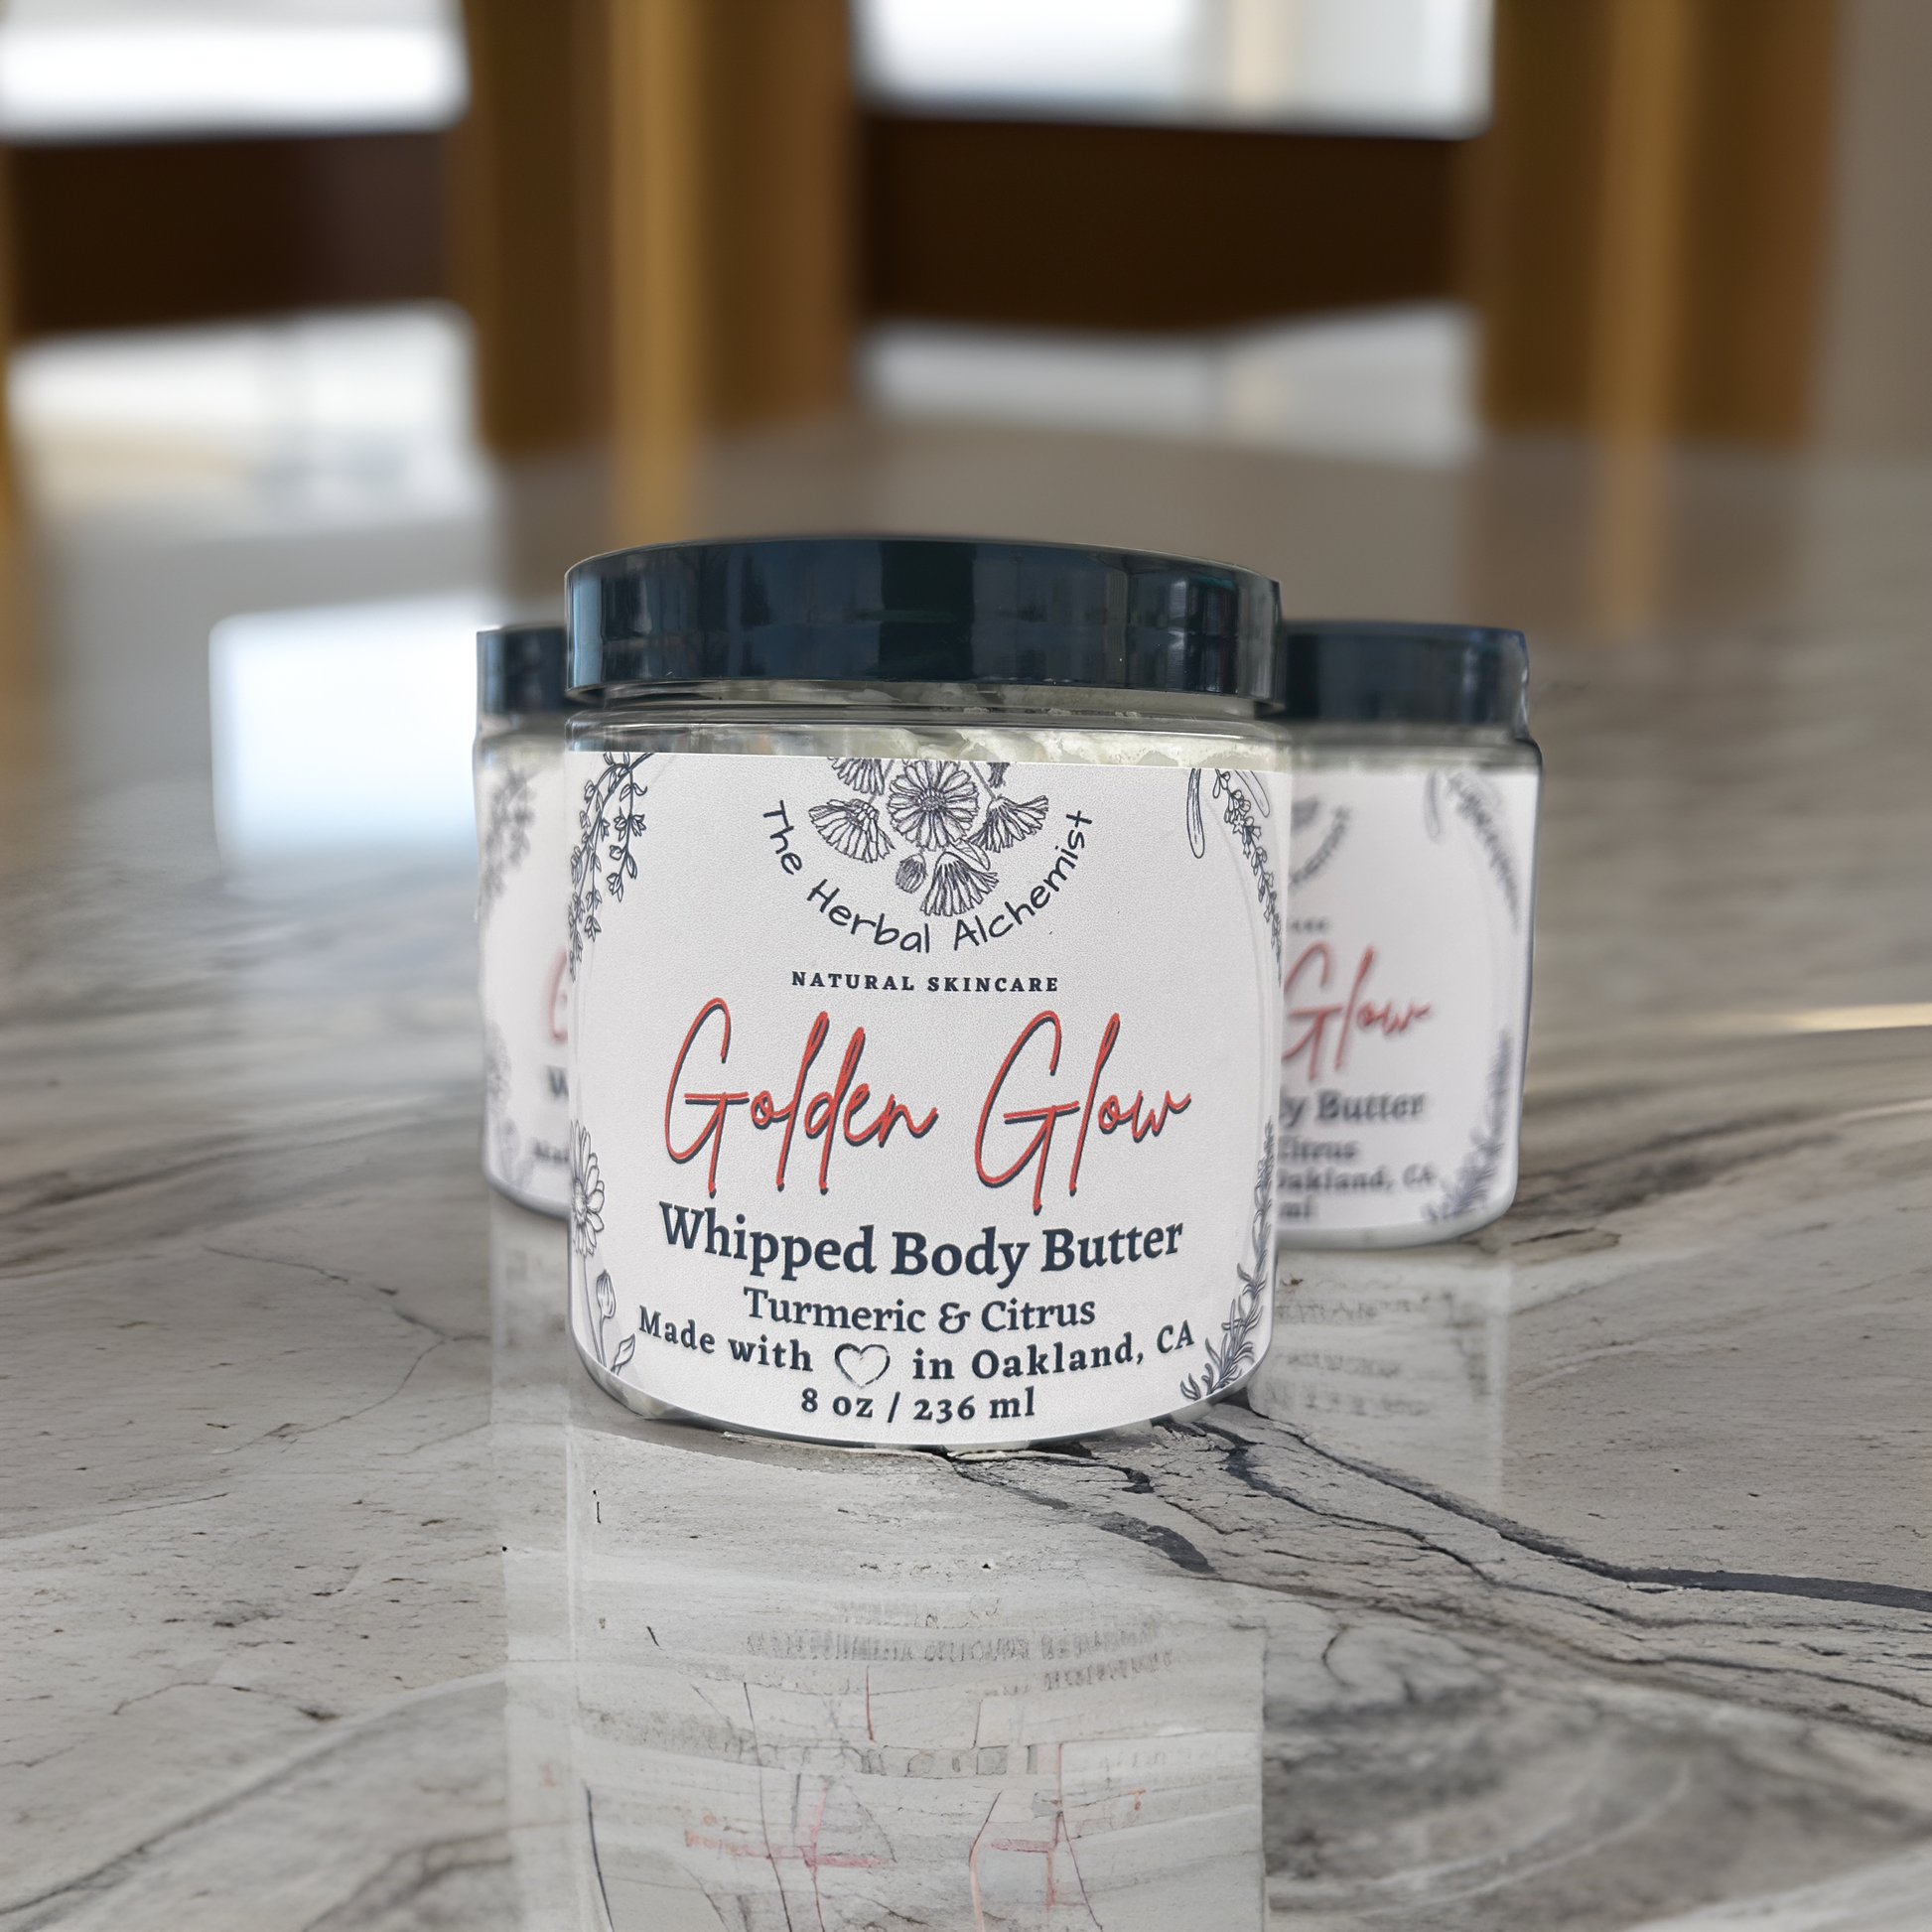 Golden Glow Whipped Body Butter - The Herbal Alchemist